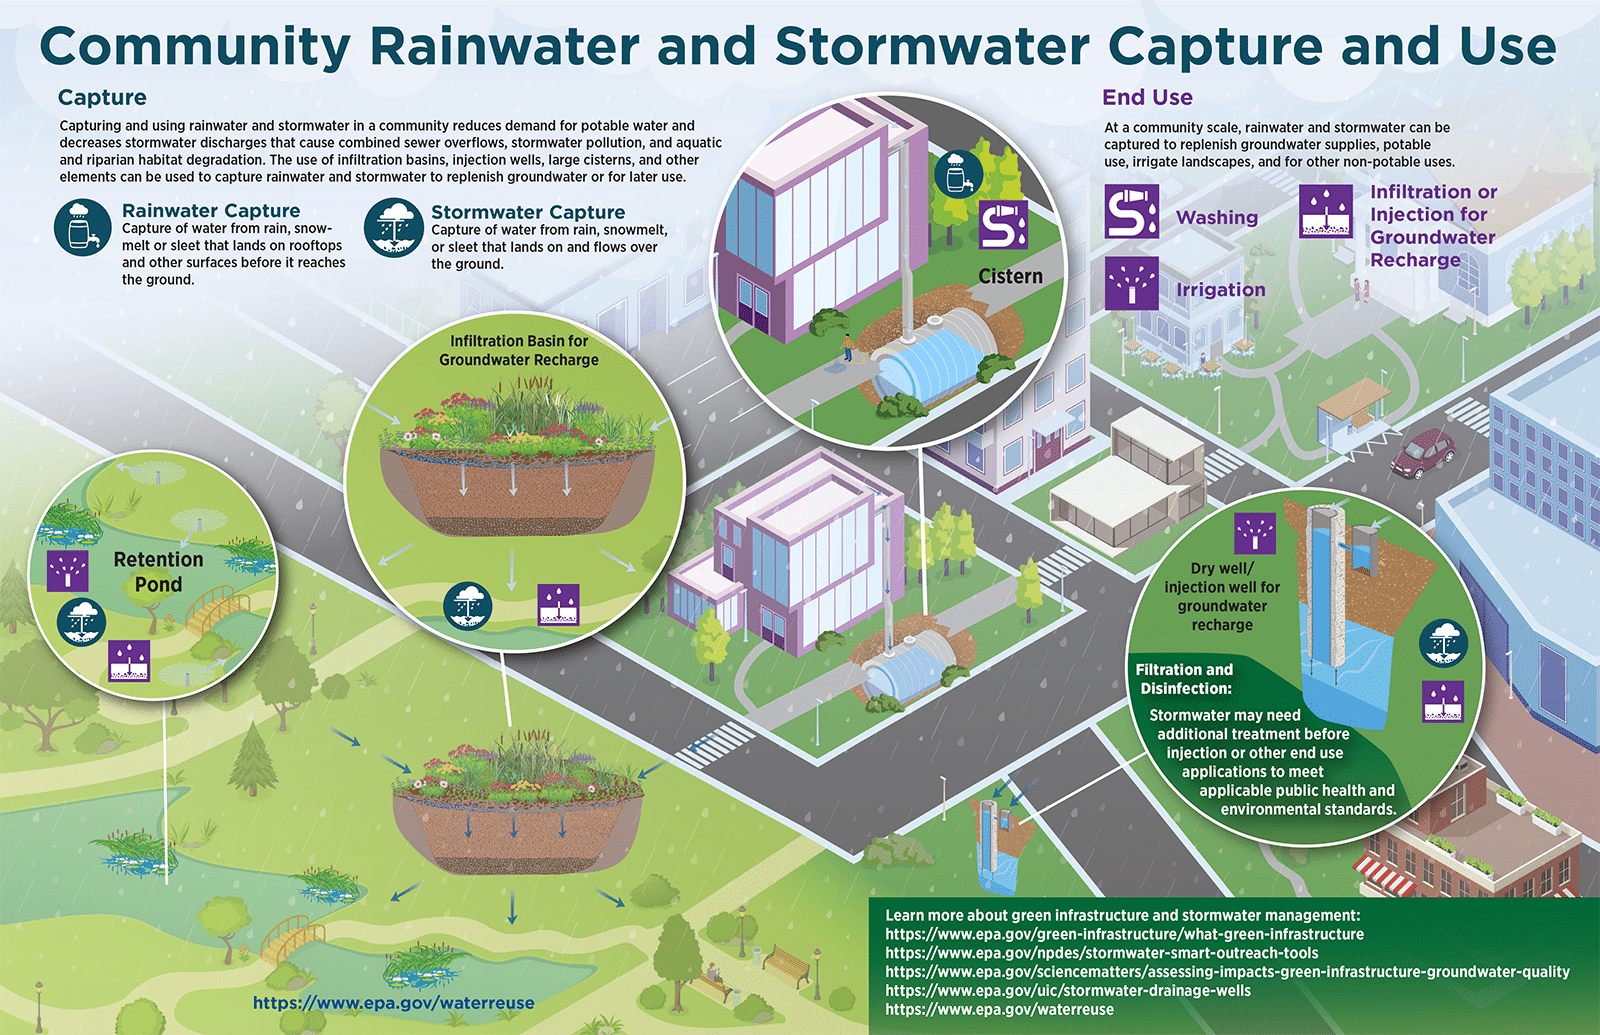 How can. you prevent stormwater pollution?